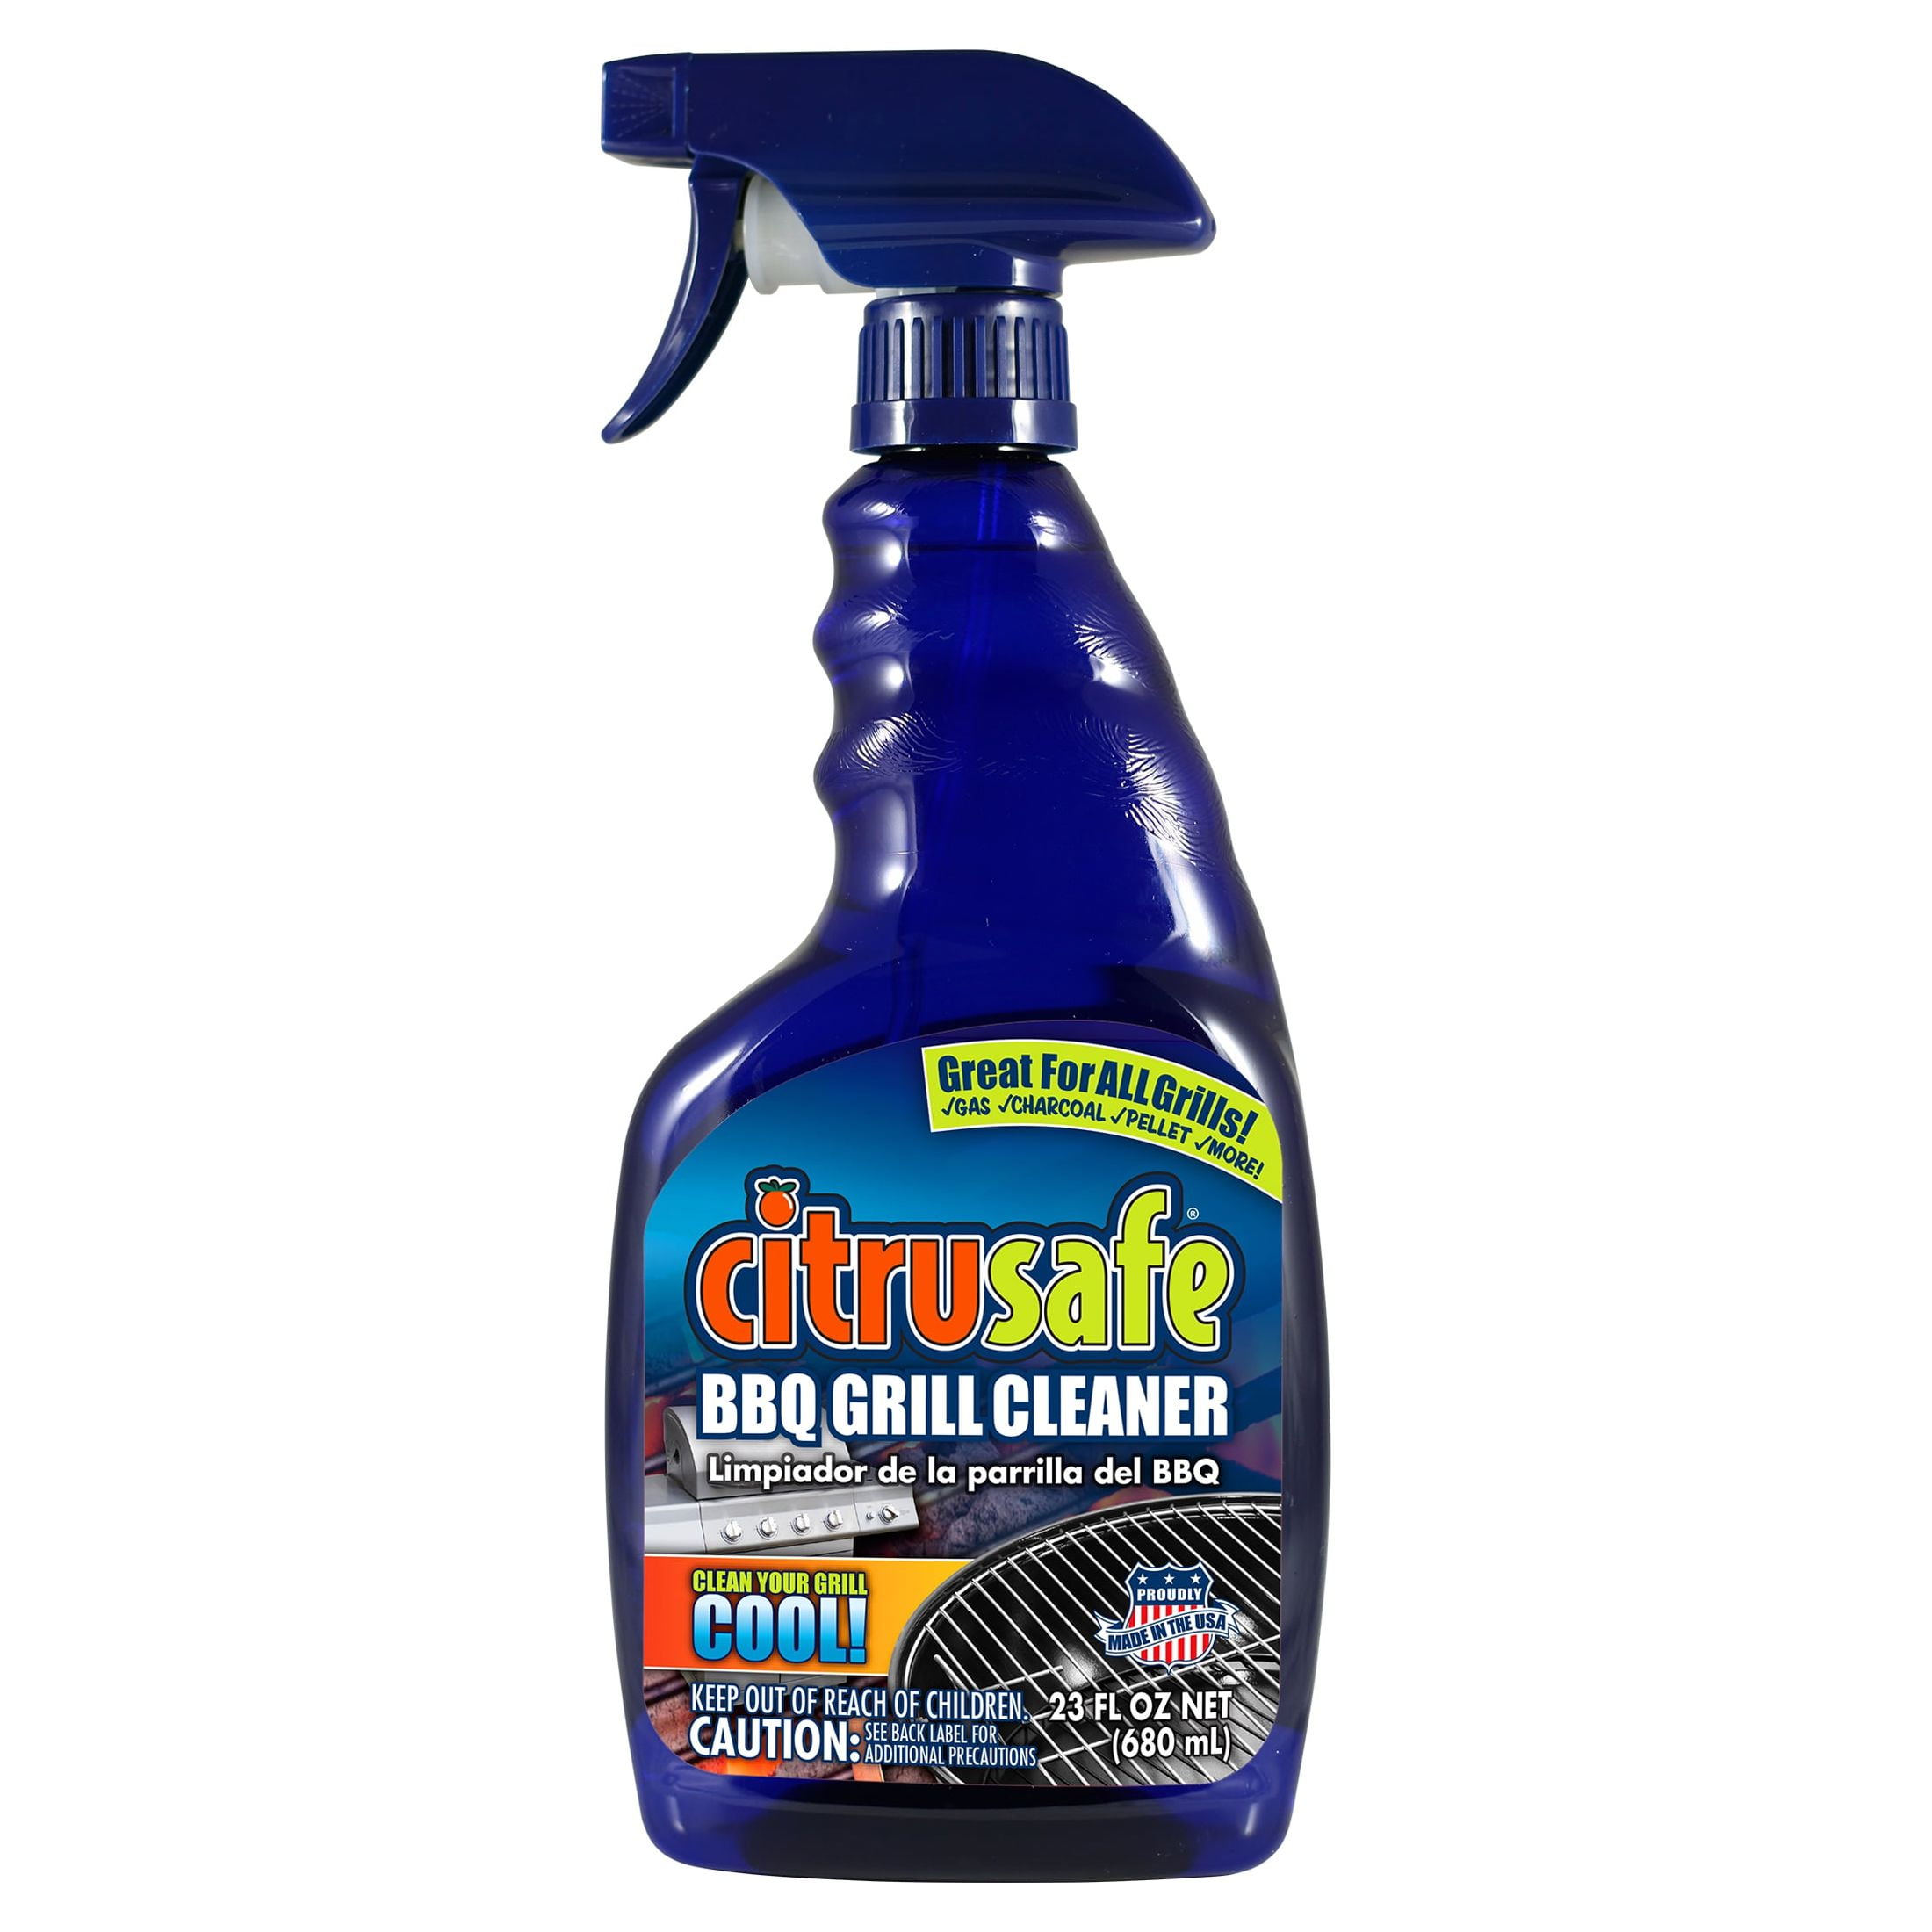 Citrusafe 23 oz. BBQ and Grill Cleaner Degreaser with Grill Scrubber Kit